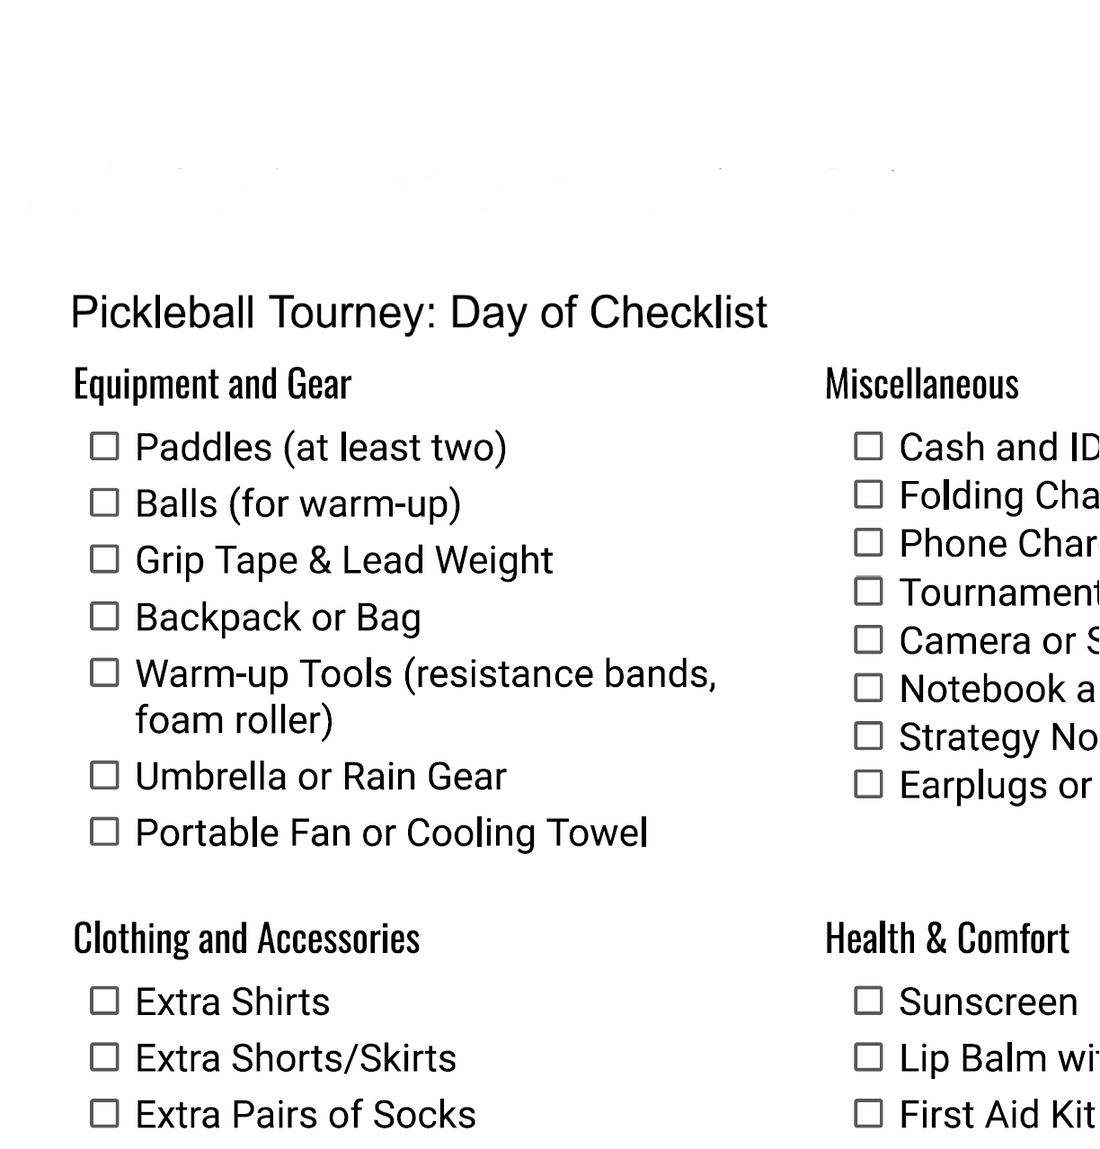 What to pack for a pickleball tournament, pickleball tournament checklist template, What to pack for a pickleball tournament pdf free, What to pack for a pickleball tournament pdf, pickleball tournament preparation